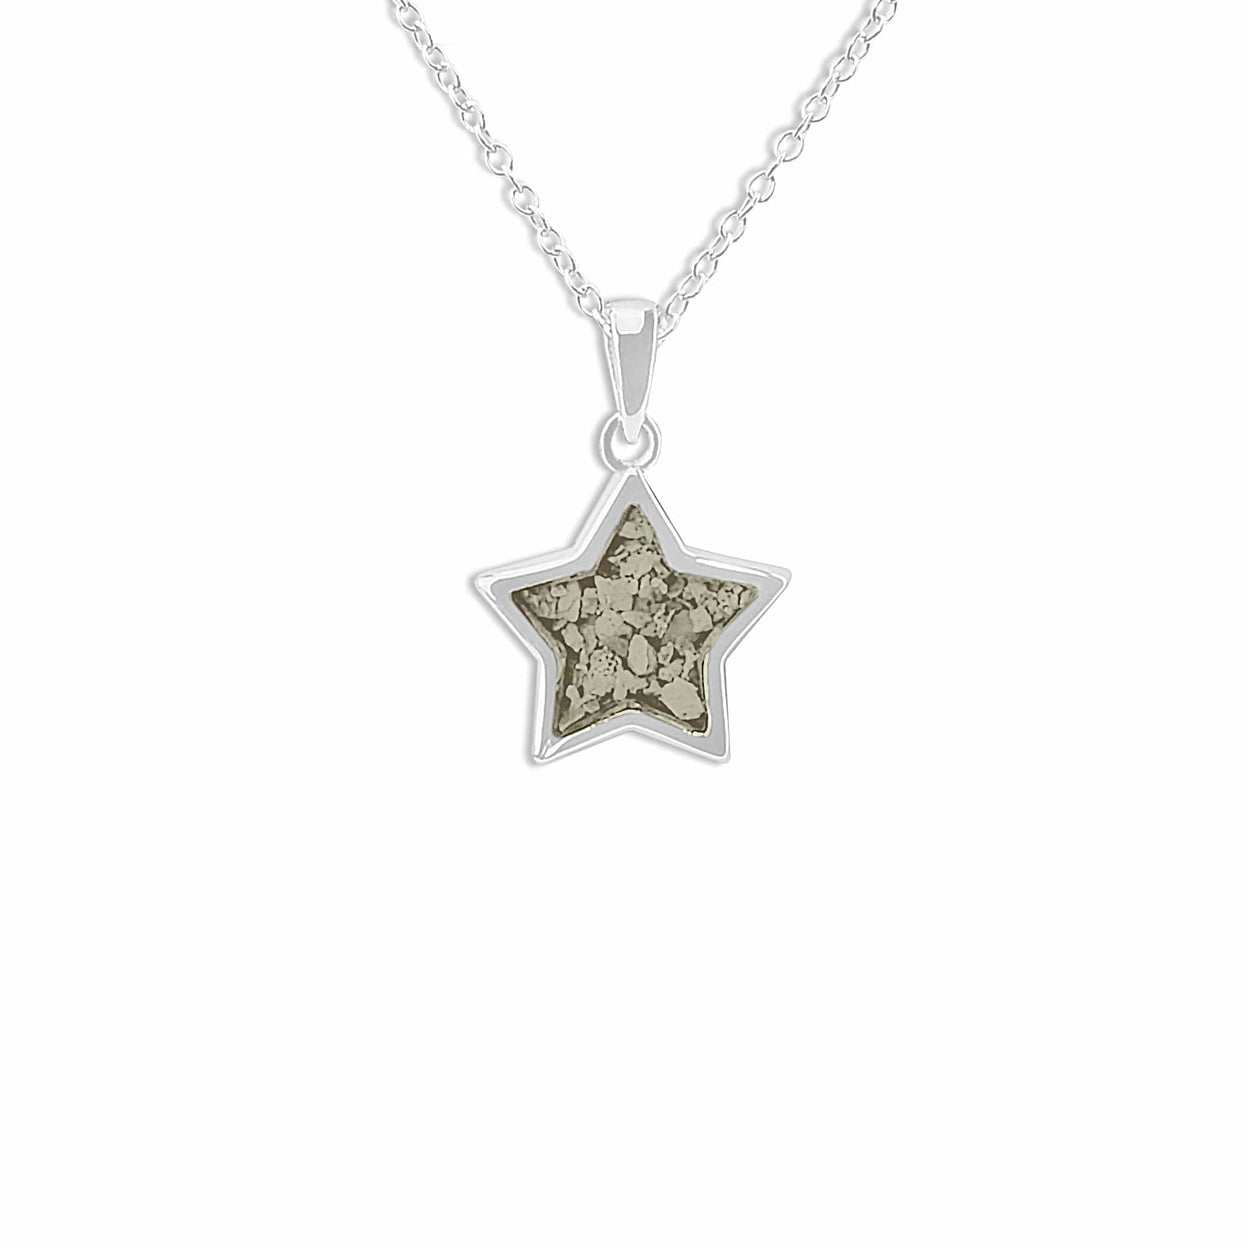 Load image into Gallery viewer, EverWith Ladies Star Memorial Ashes Pendant